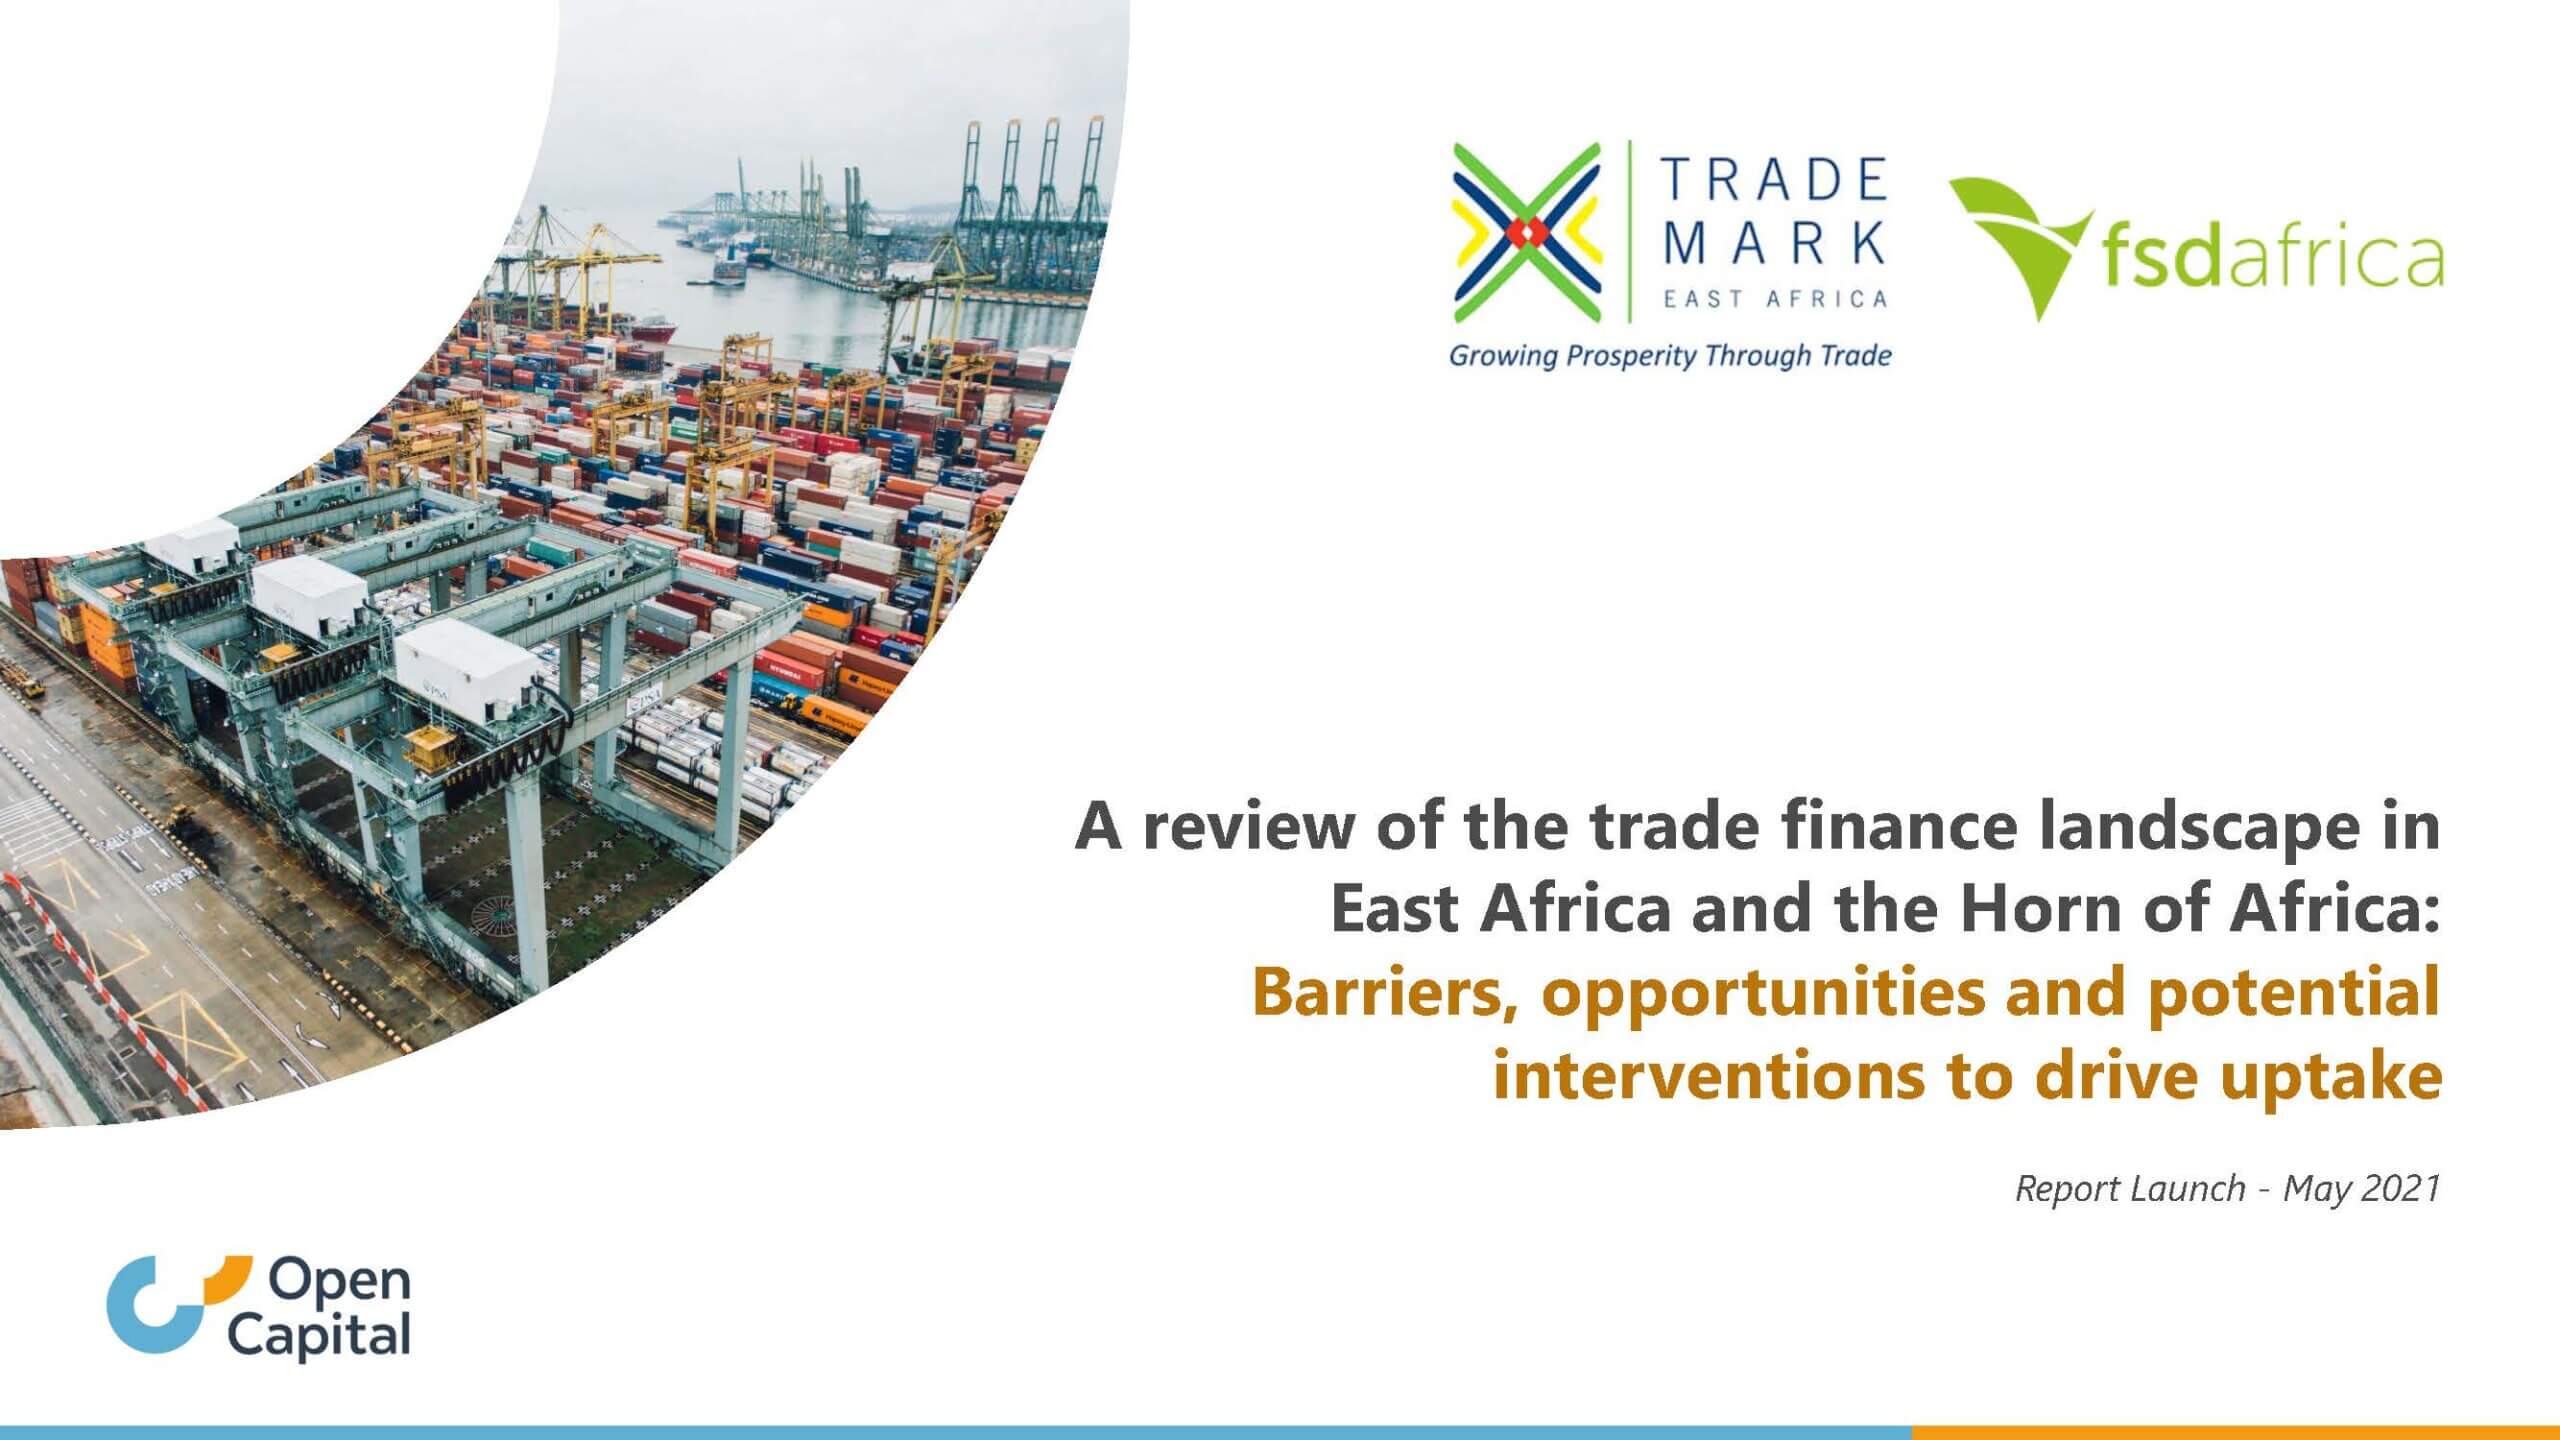 Ground-breaking report on ‘Trade Finance Landscape in East Africa& Horn of Africa’ launched by TradeMark E.A & FSD Africa